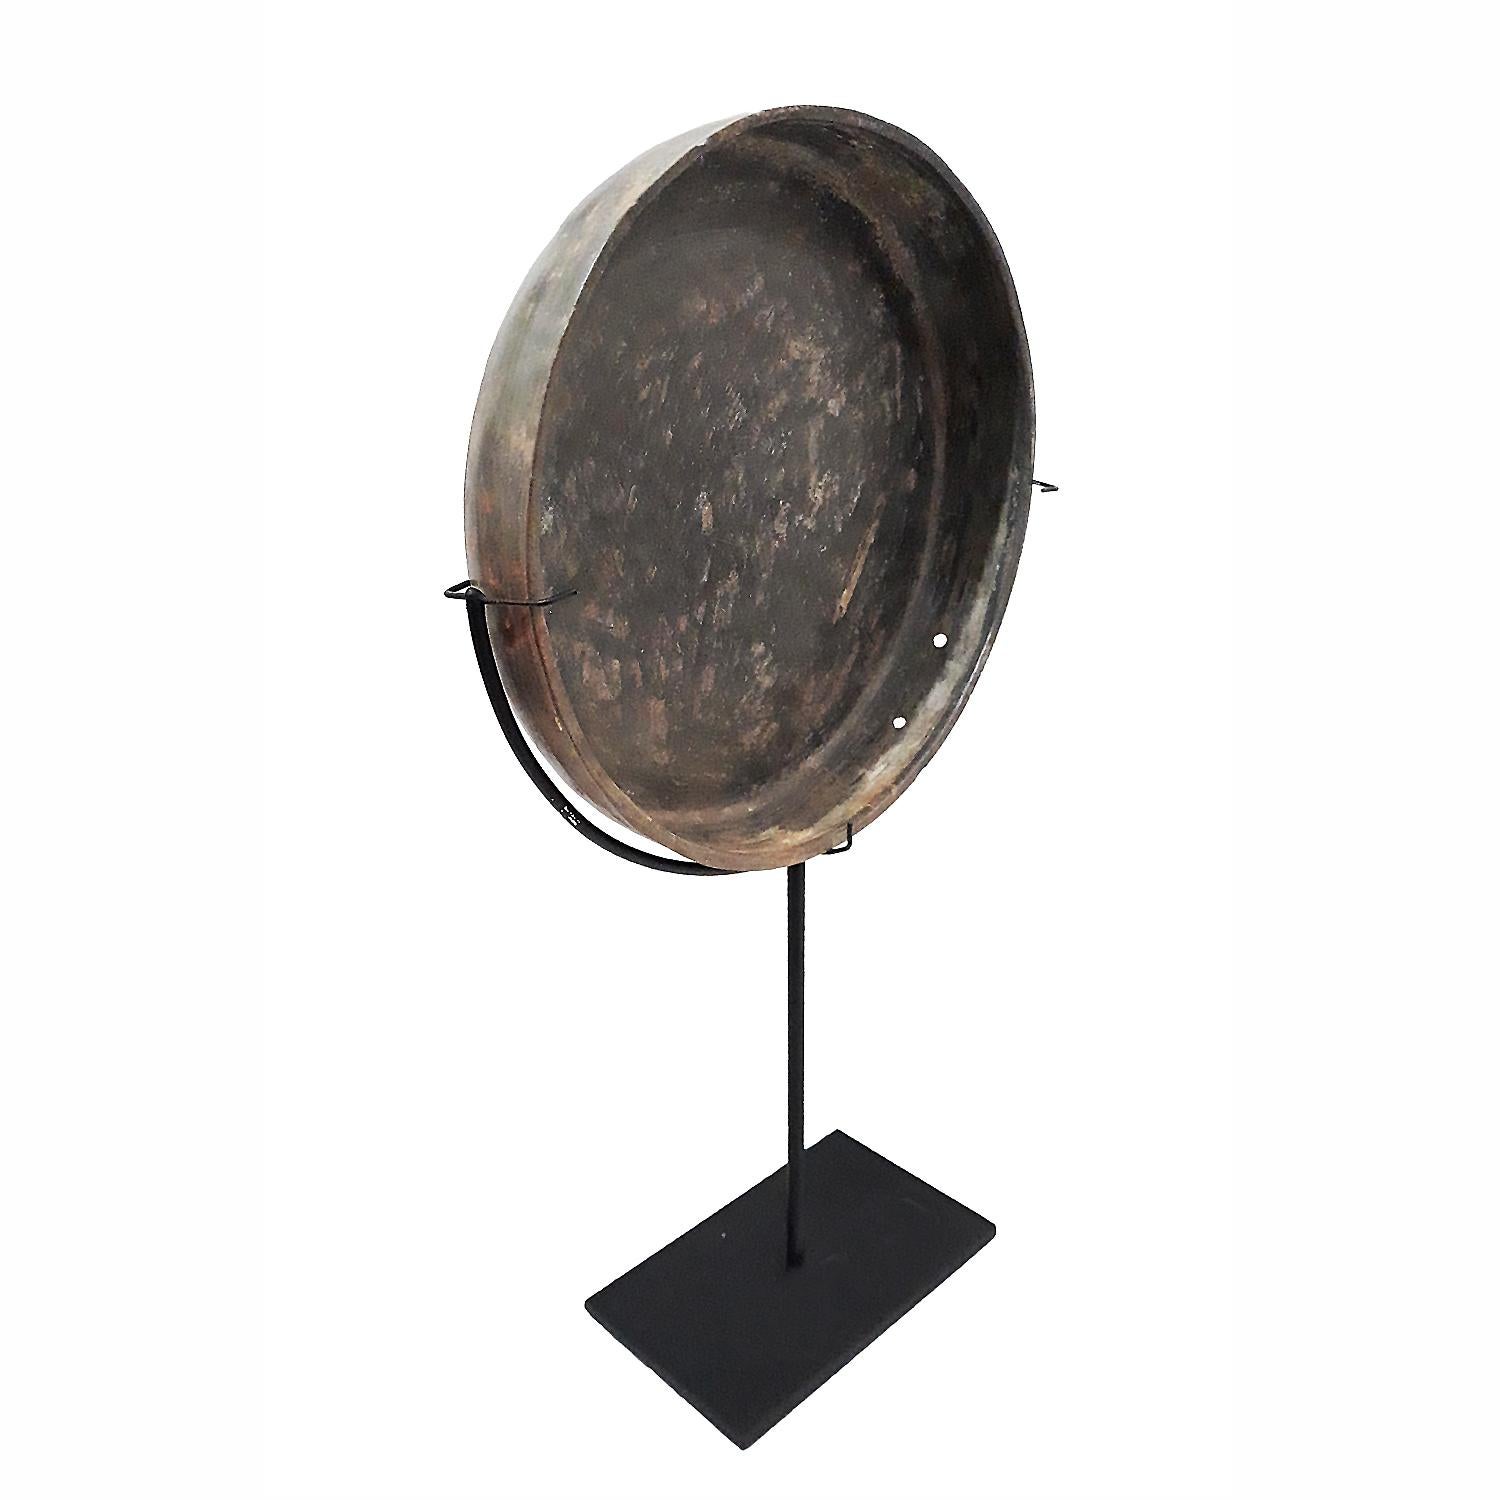 A bronze mirror or tray from Thailand, early 18th century. Mounted on a black metal stand. 

Traditionally used with water or oil to enhance reflection when used as a mirror, it now has a natural patina conferred by the action of time and the